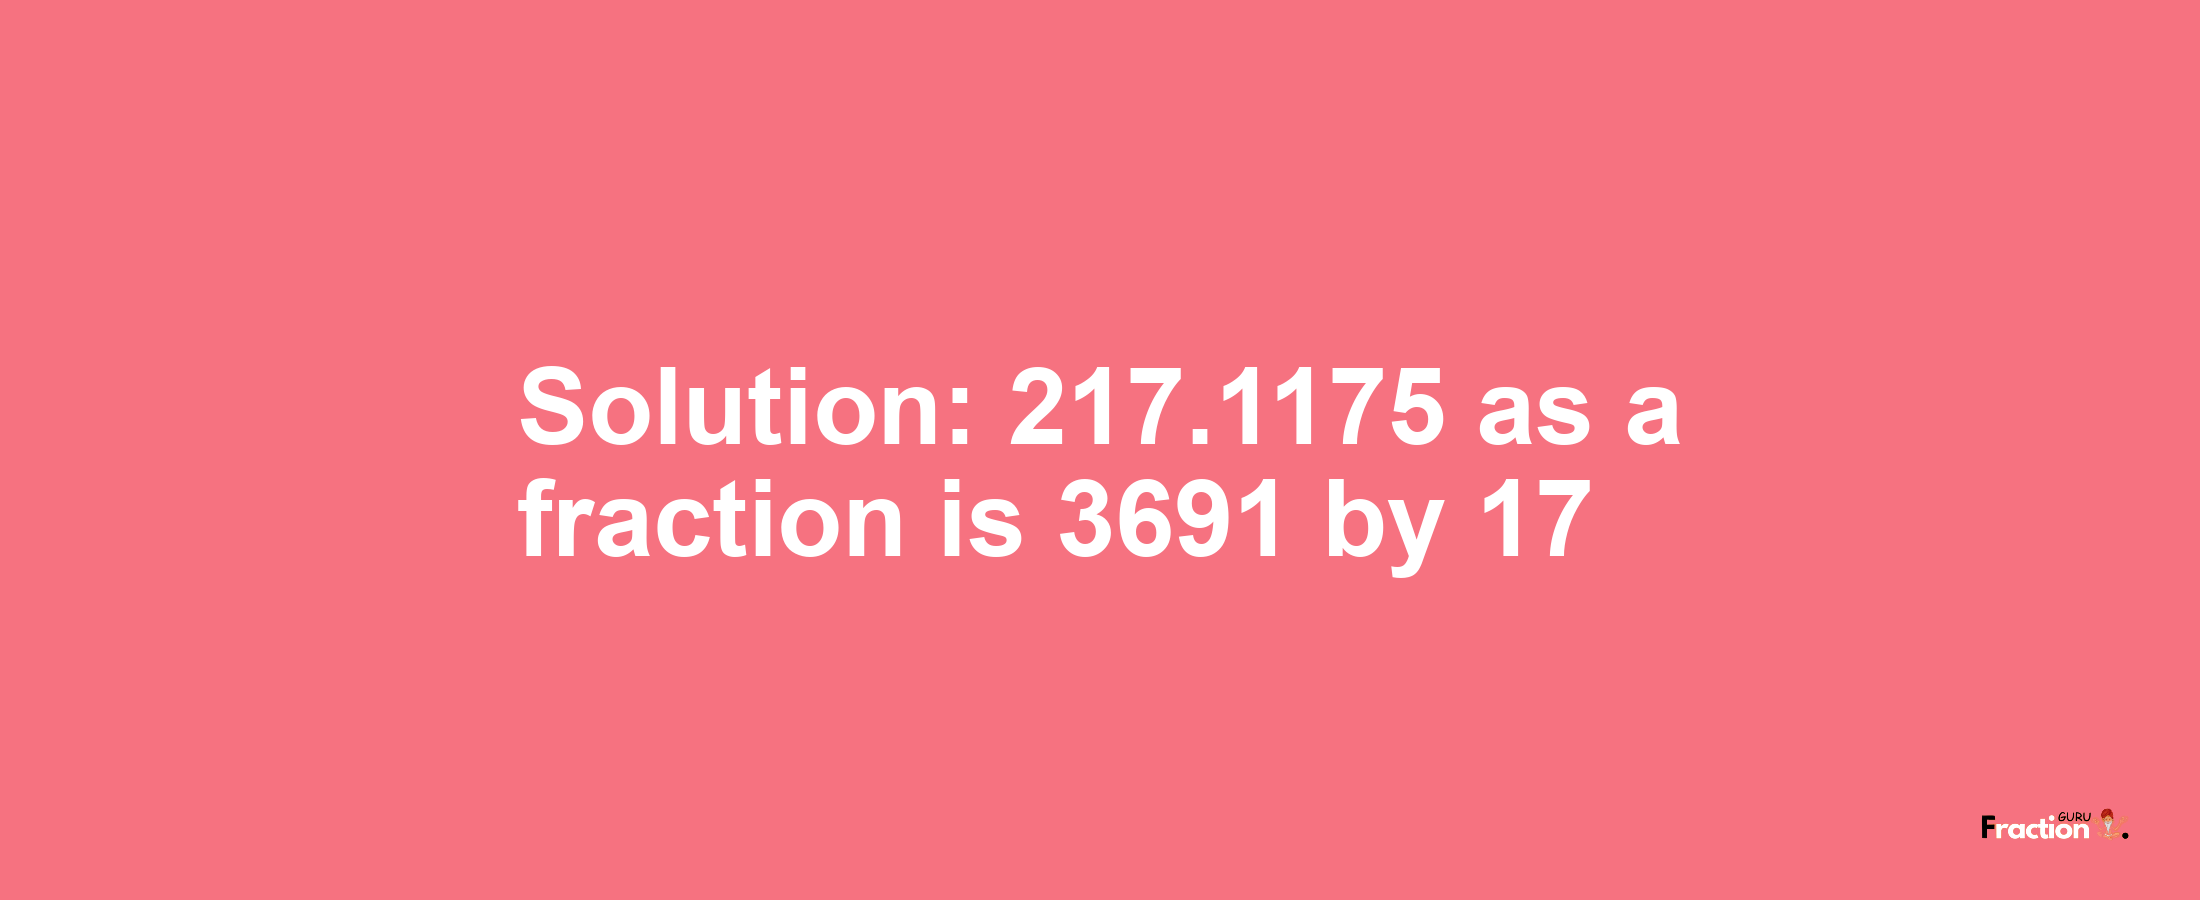 Solution:217.1175 as a fraction is 3691/17